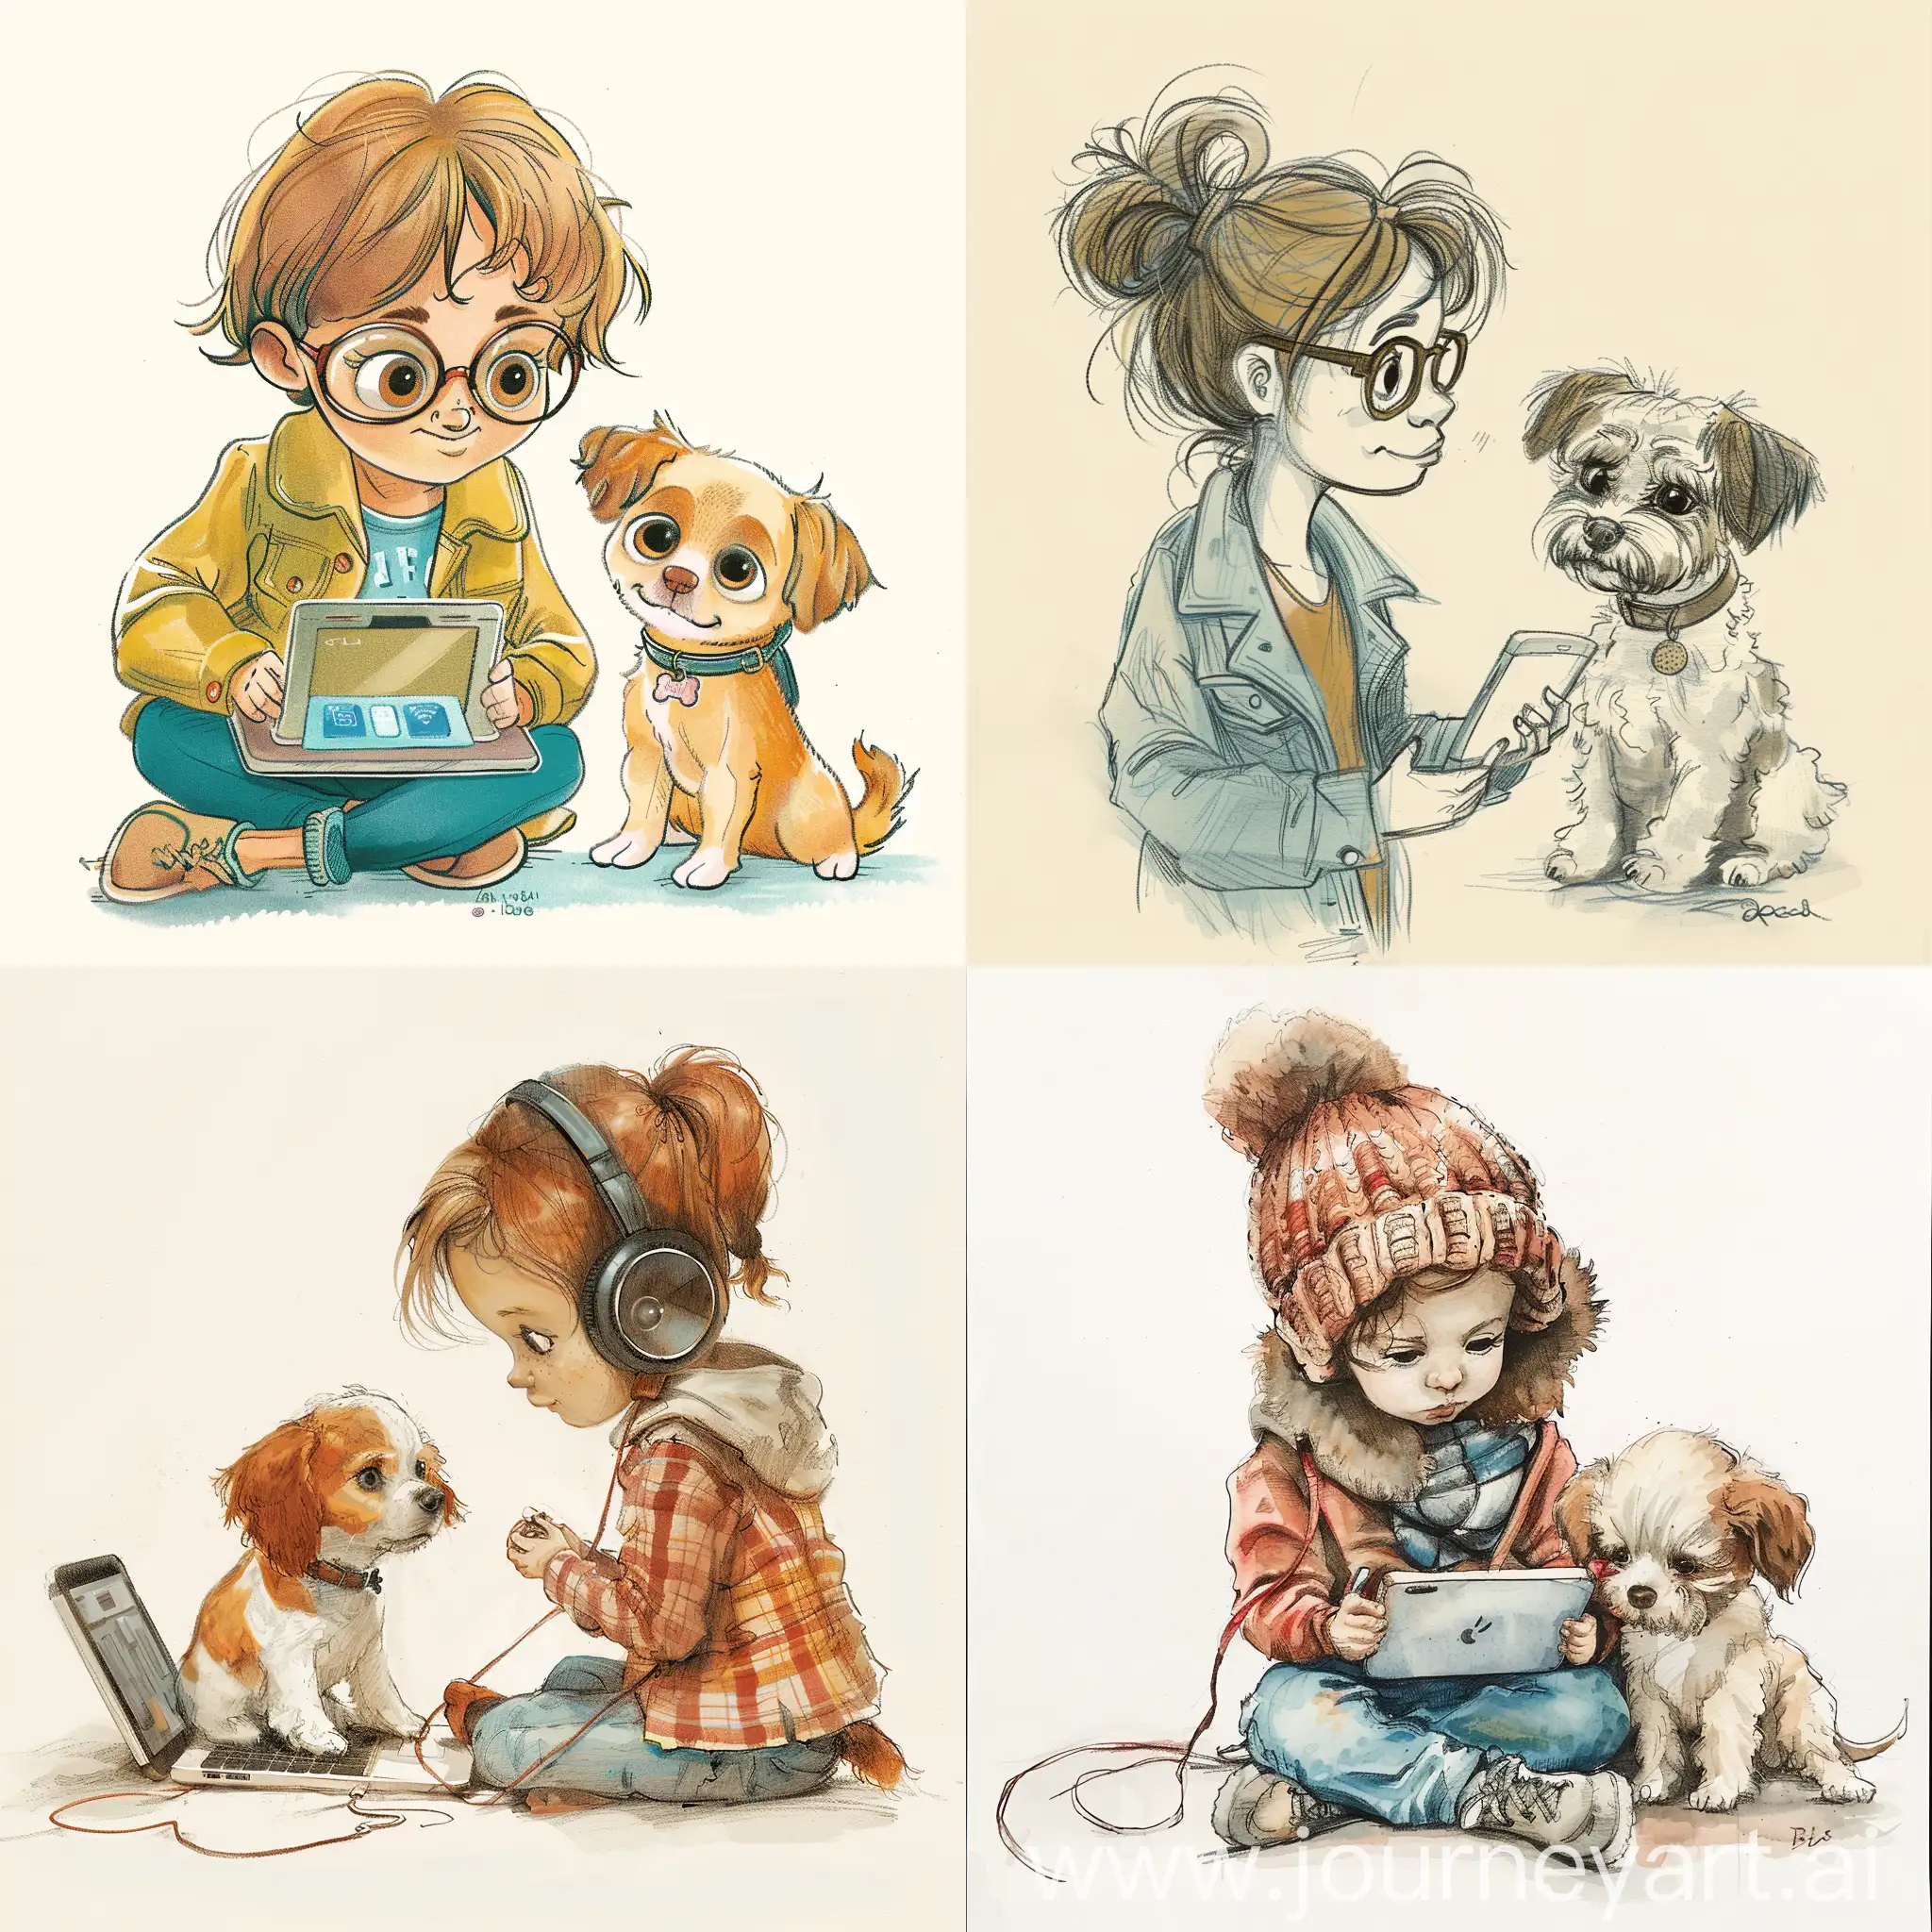 Young-Pet-Lover-Embracing-Modern-Technology